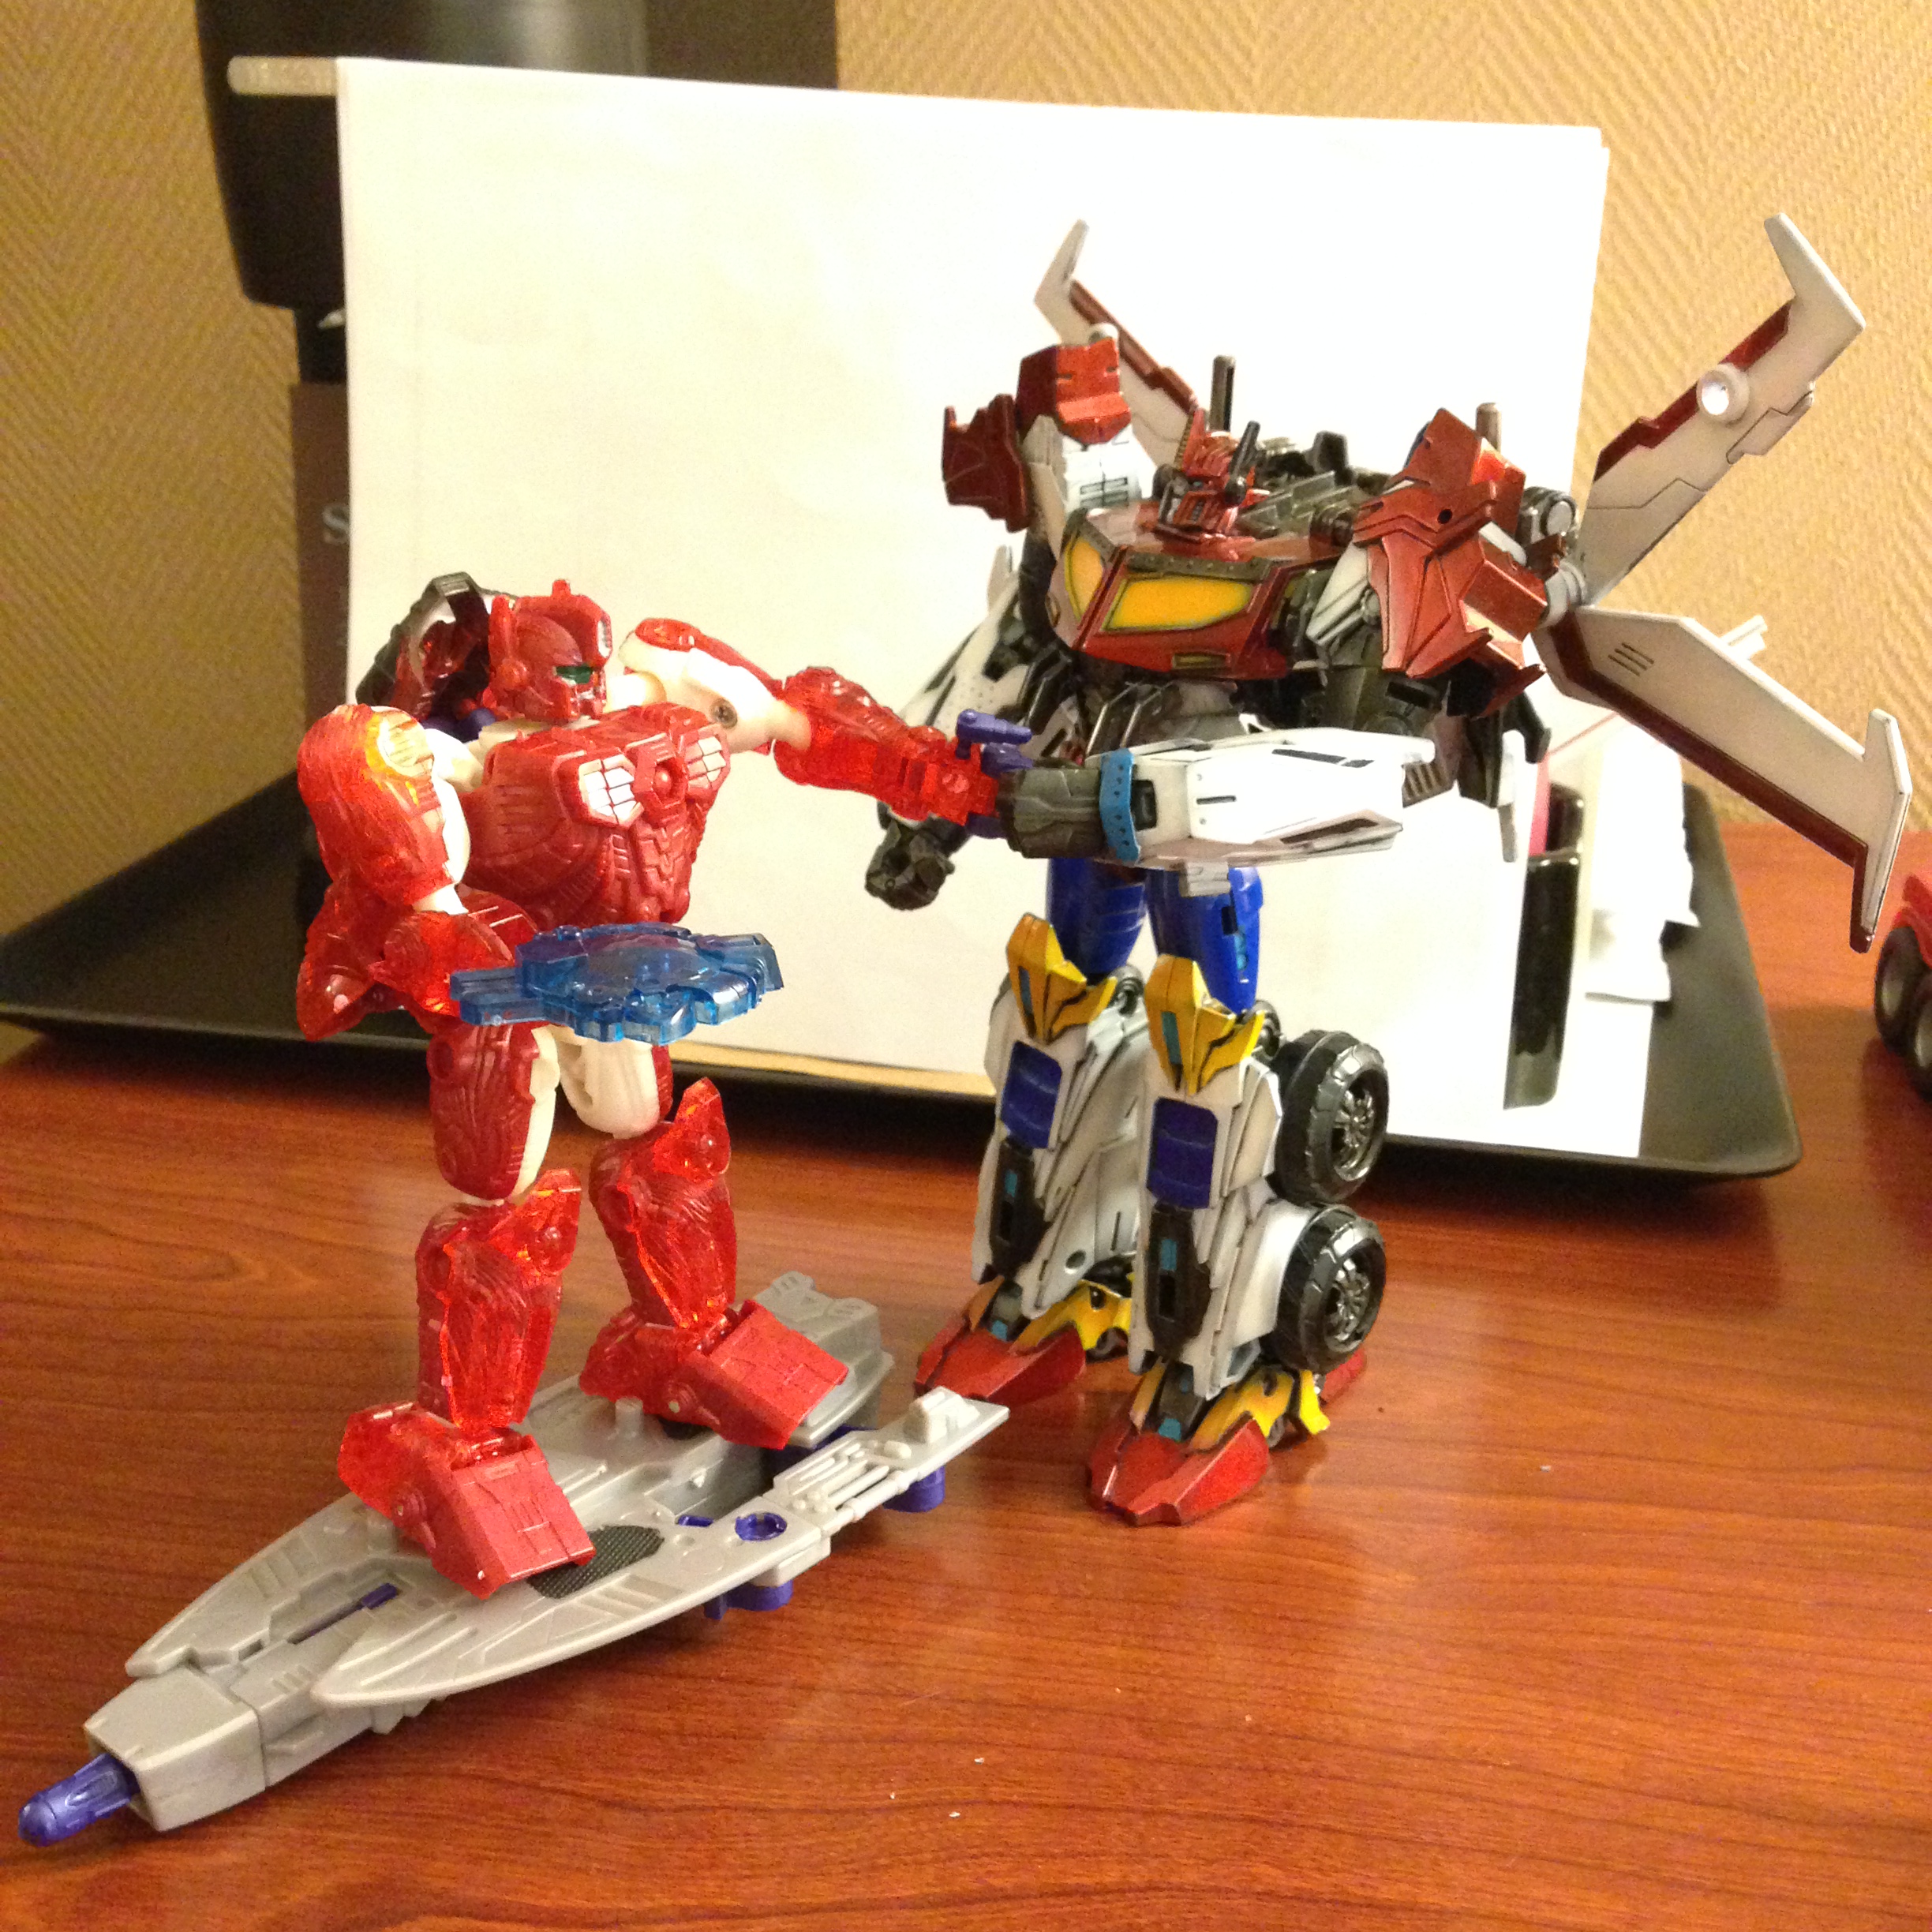 Victory Saber and the custom figure! (Botcon Day 0)